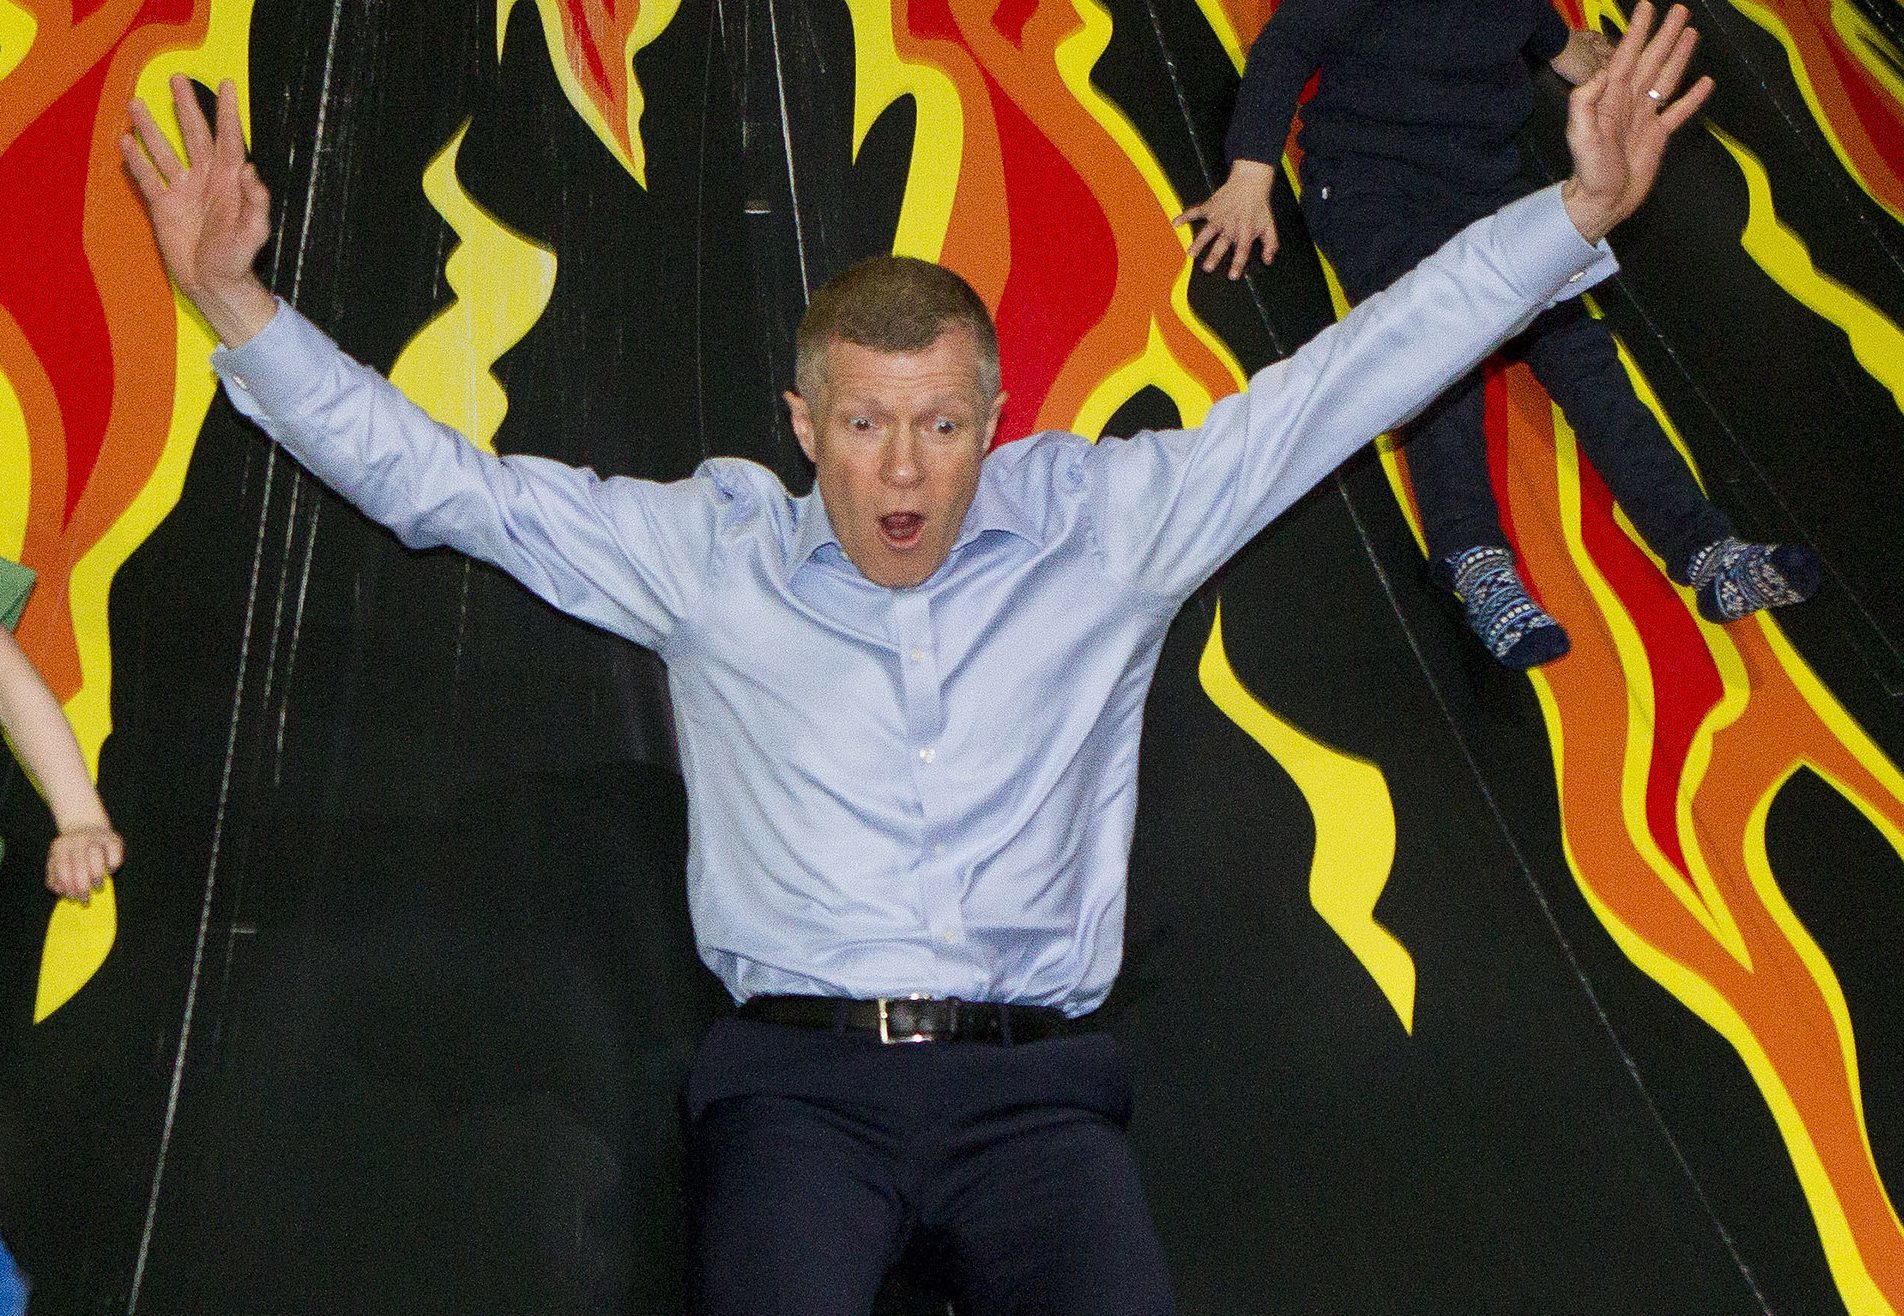 Scottish Liberal Democrat leader Willie Rennie launched his parties manifesto at Jungle Adventure soft play area in Edinburgh ahead of the Holyrood elections in April 2016